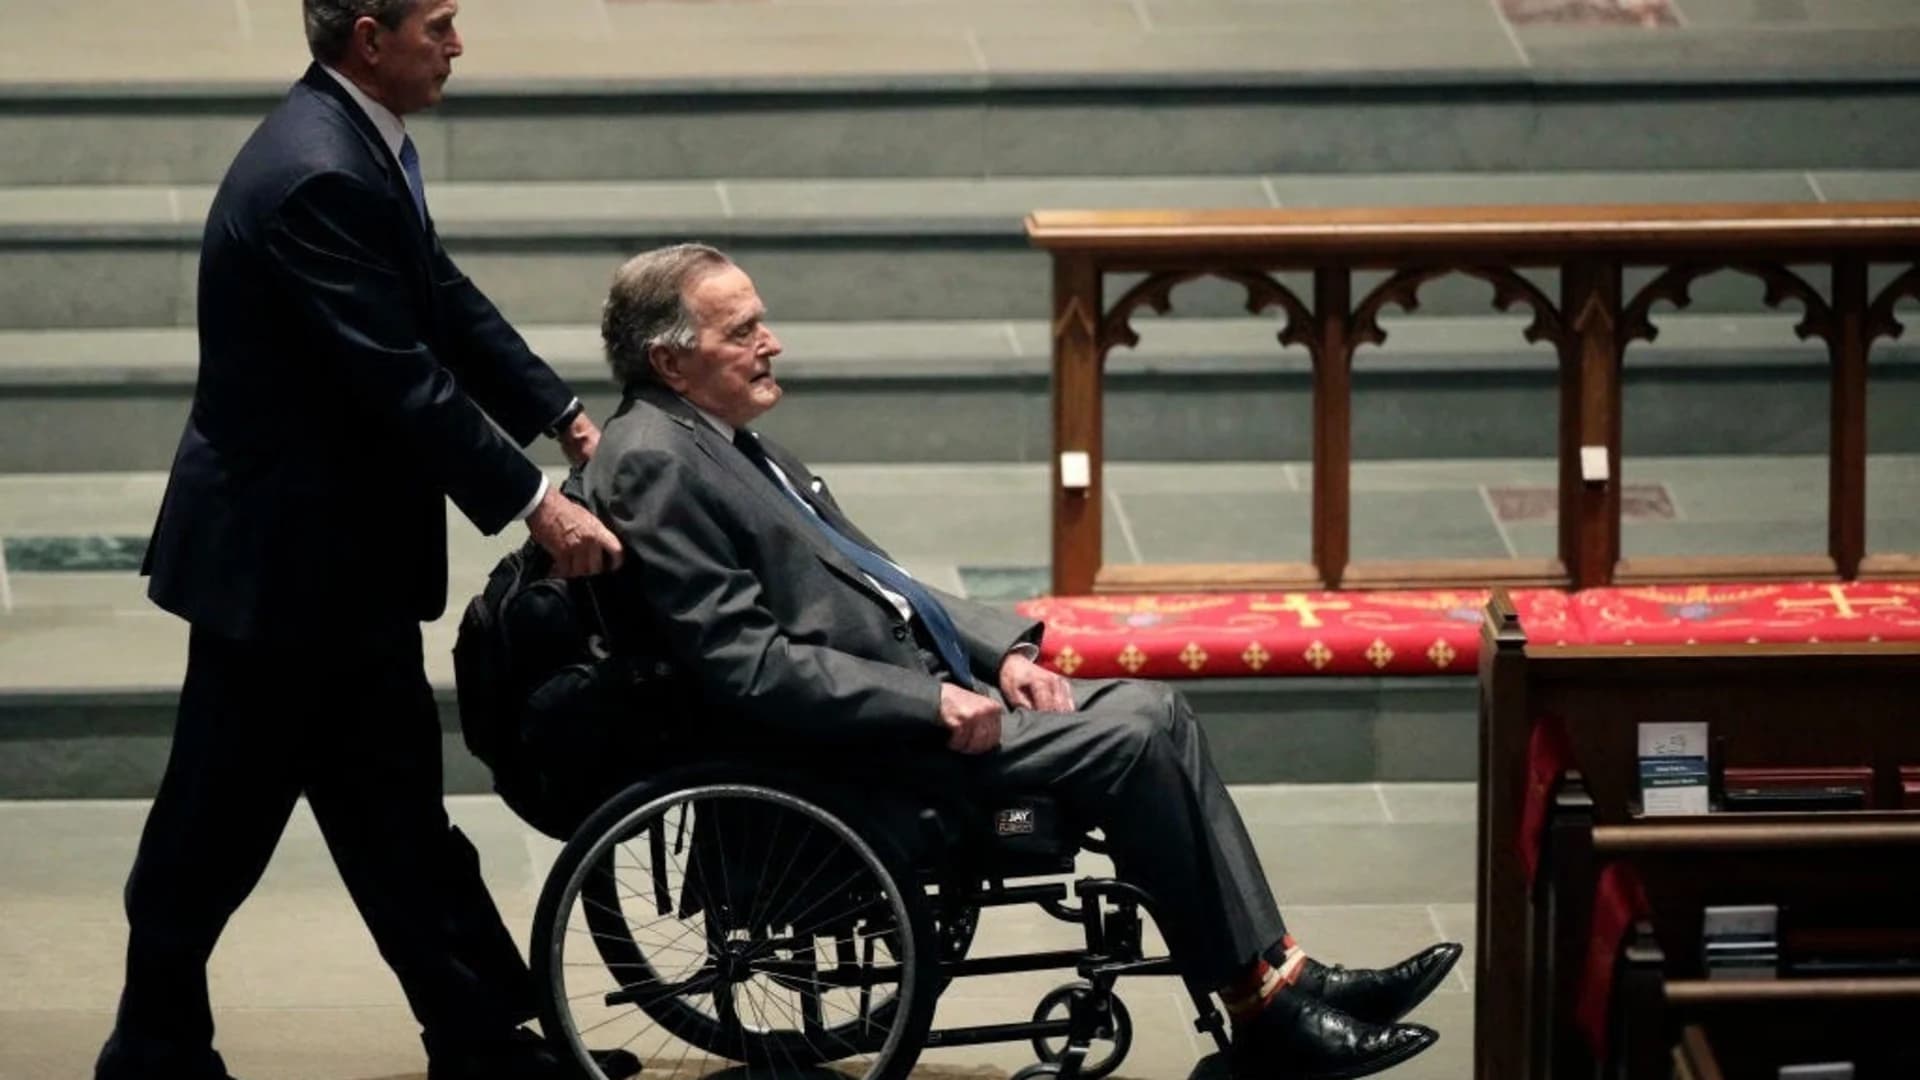 Spokesman: George HW Bush hospitalized with blood infection